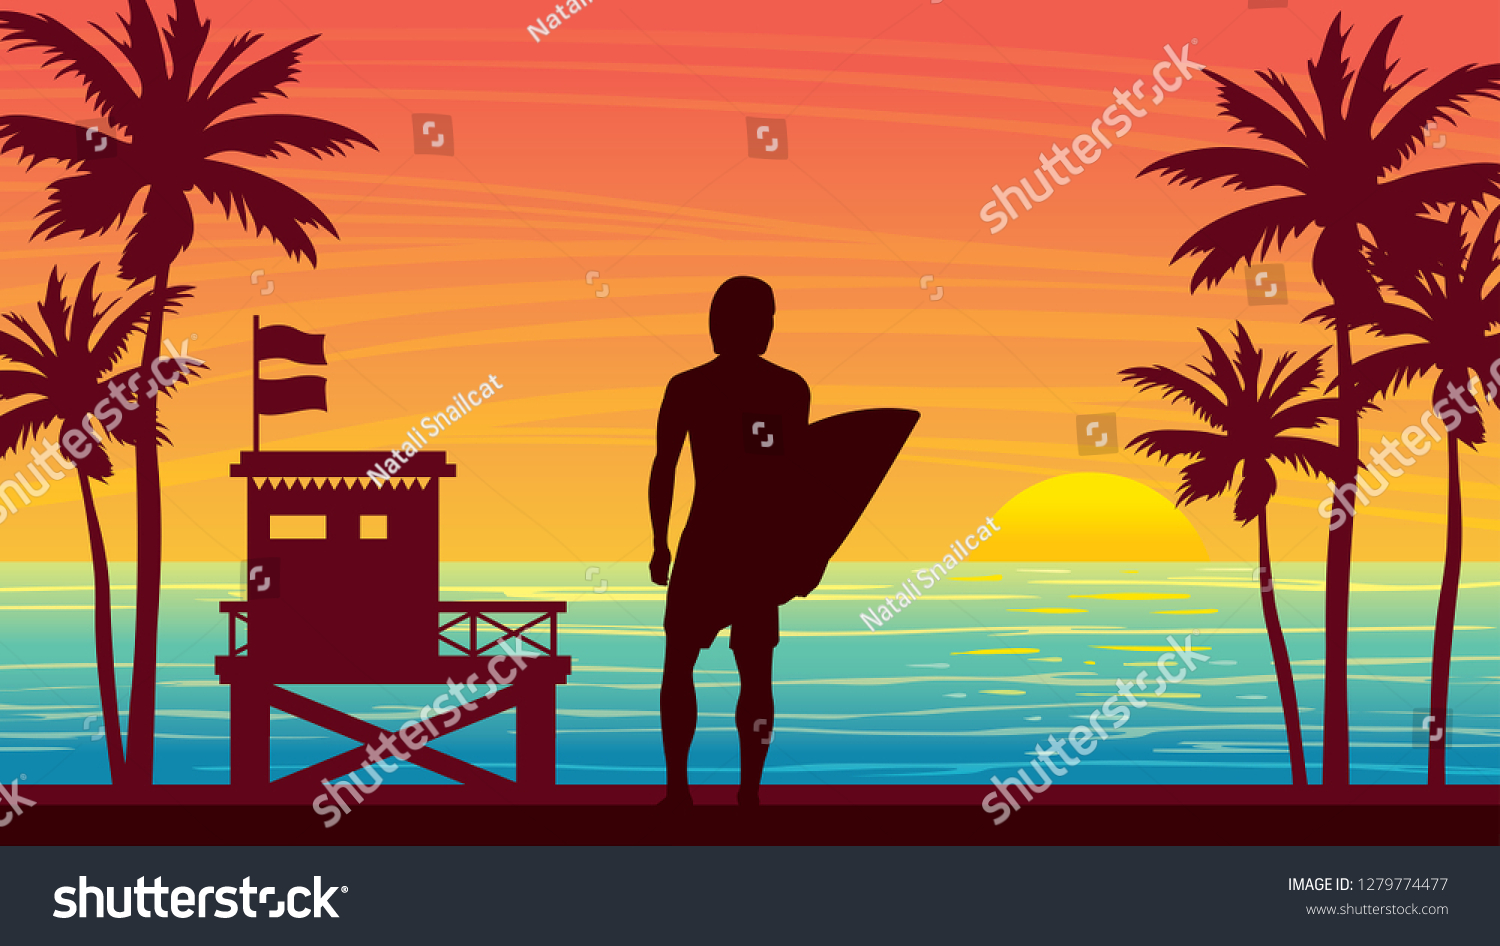 SVG of Nature landscape with silhouette of surfer, lifeguard station and palm tree on a sunset sky. Vector summer illustration. Water sport - surfing. svg